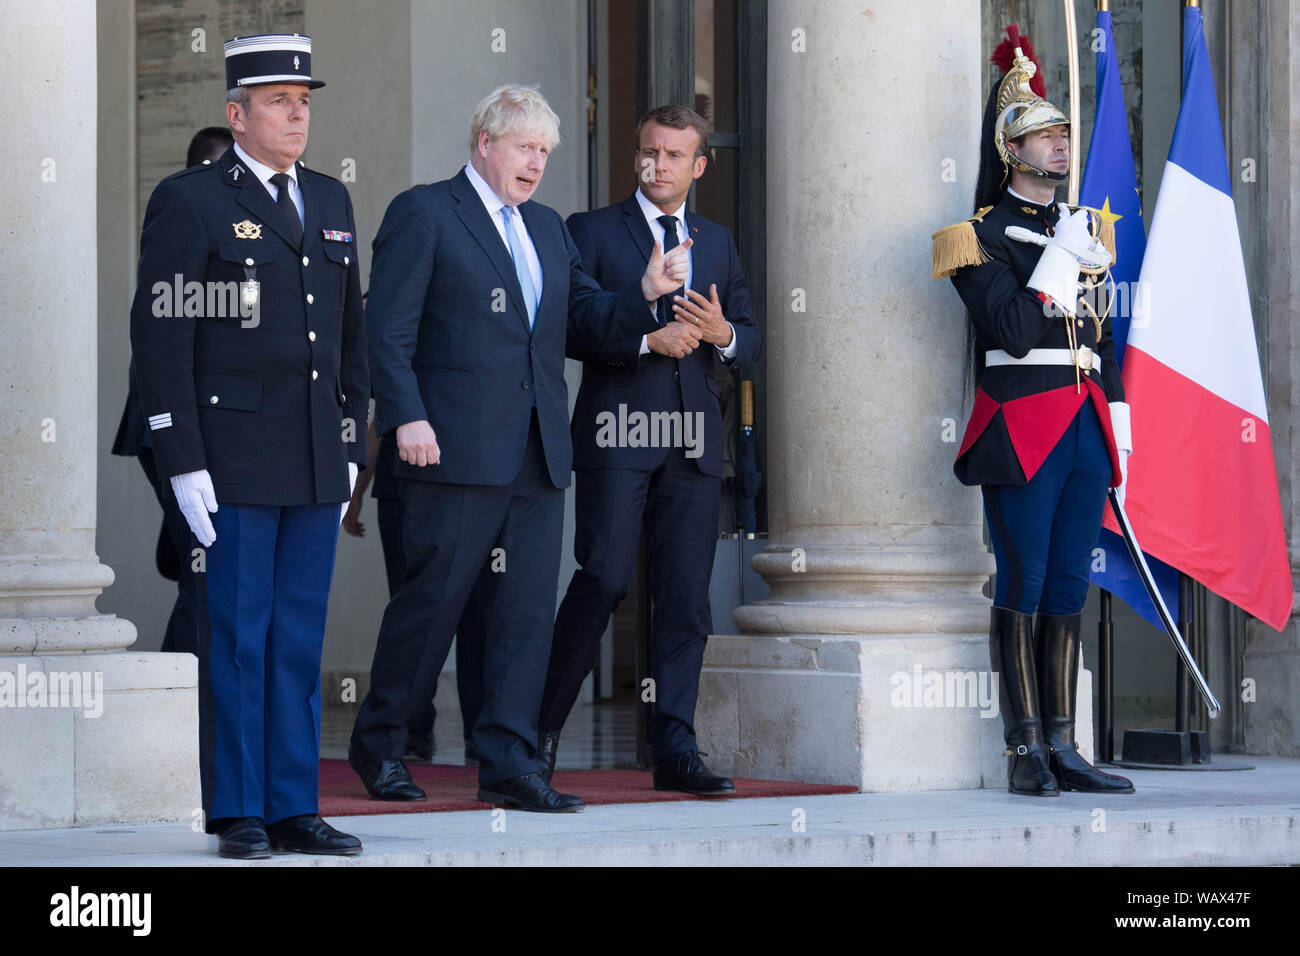 Prime Minister Boris Johnson and French President Emmanuel Macron at the Elysee Palace in Paris following talks to try to break the Brexit deadlock. Stock Photo